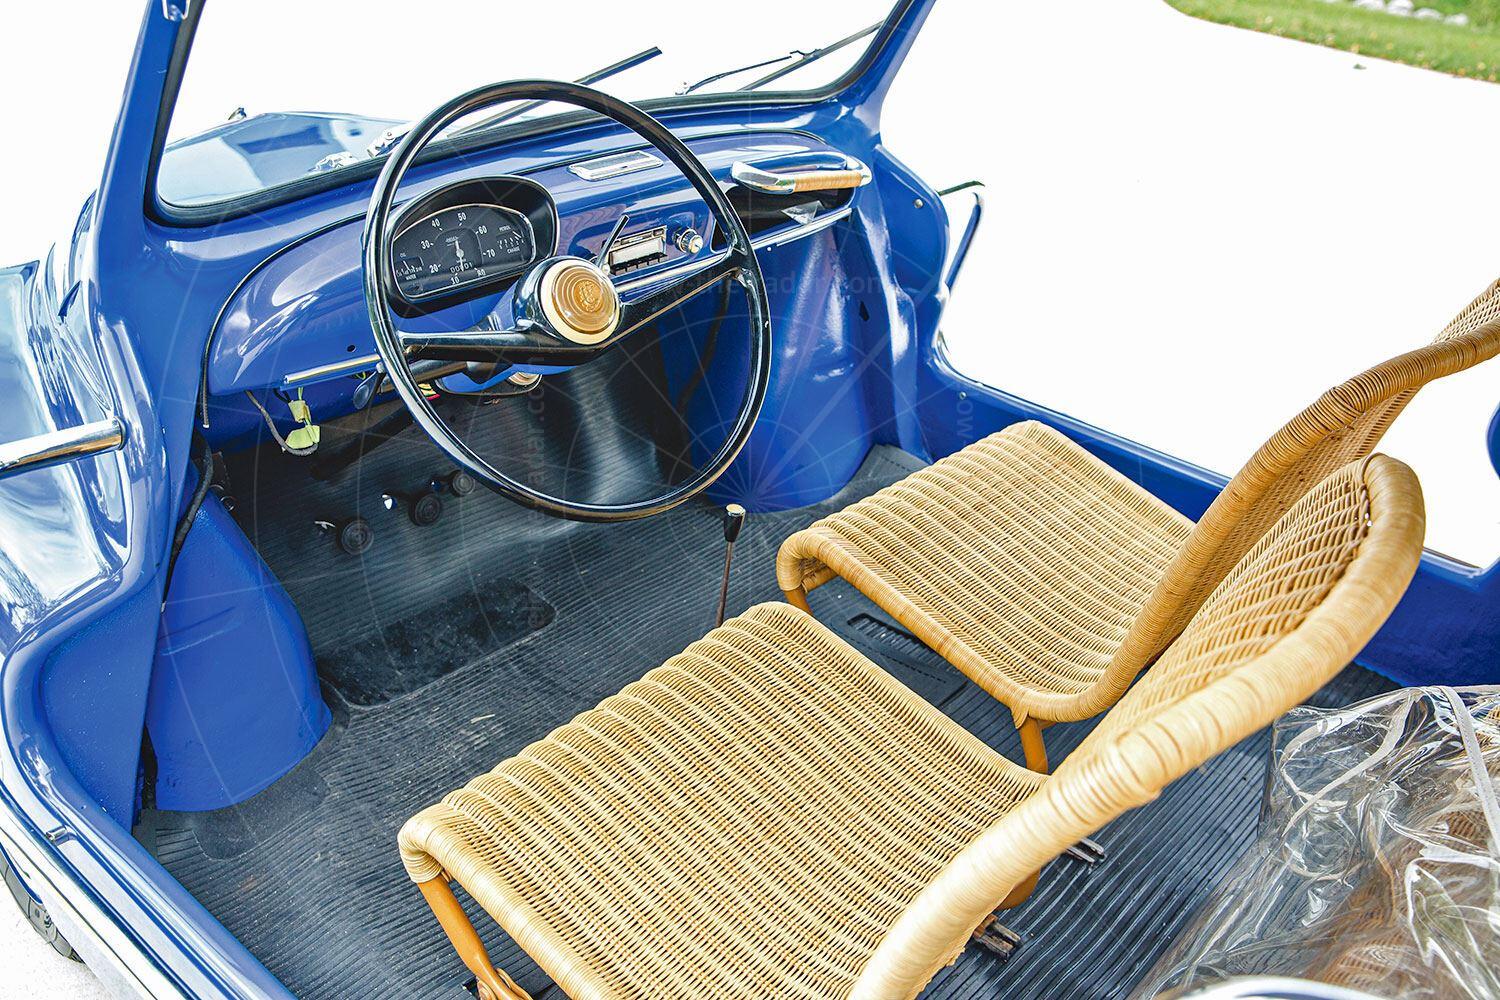 Renault 4CV Jolly interior Pic: RM Sotheby's | Renault 4CV Jolly interior